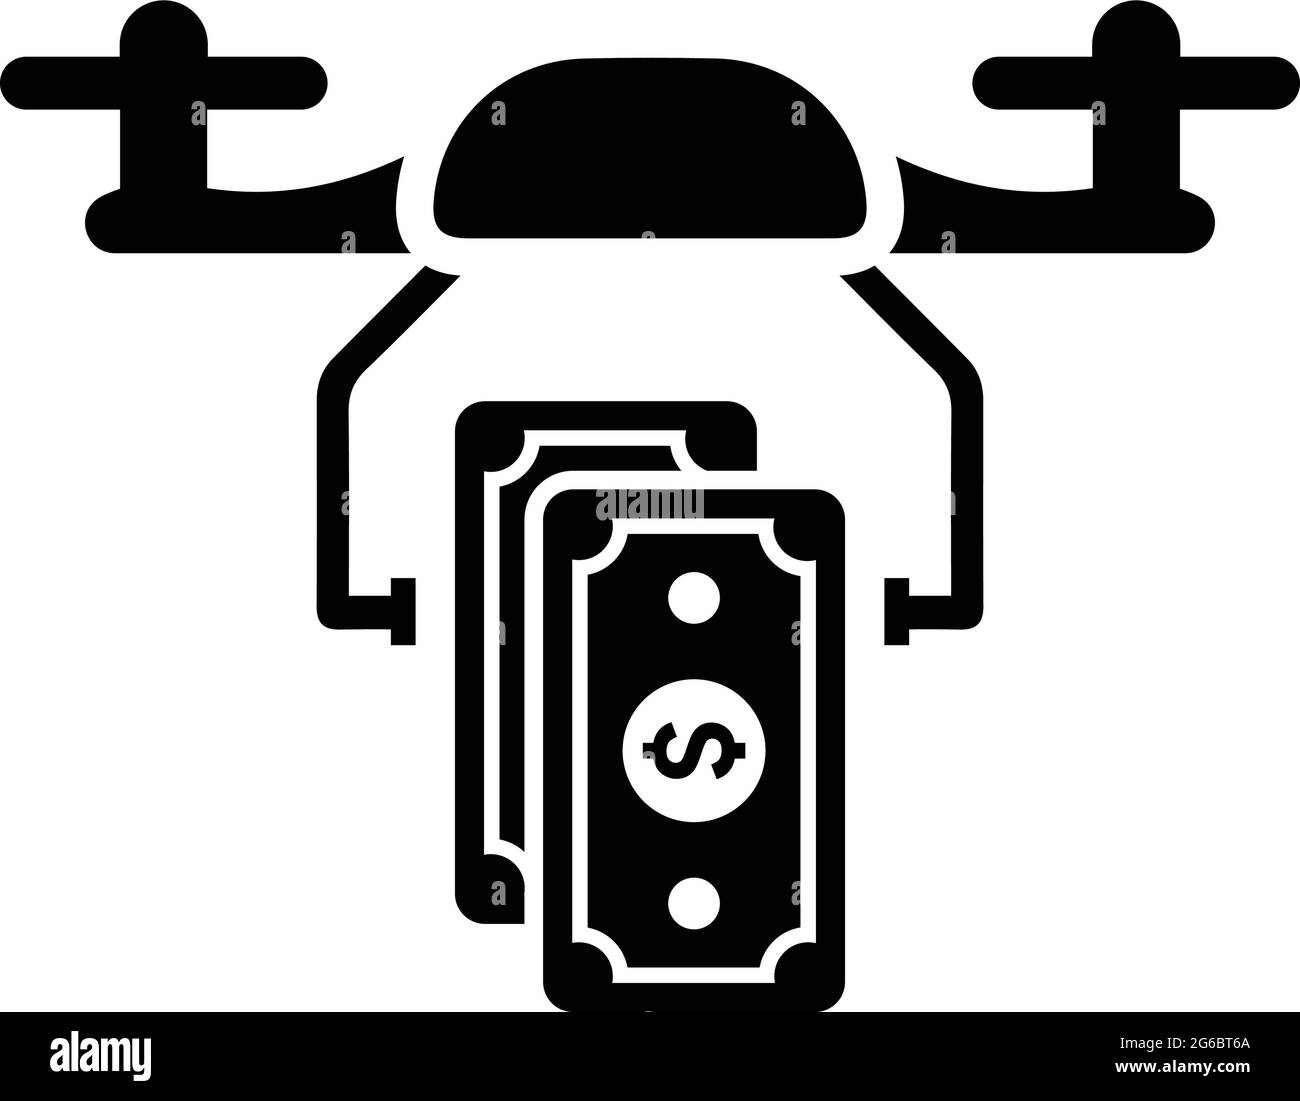 Commerce, trade, flying drone icon is isolated on white background. Use for graphic and web design or commercial purposes. Vector EPS file. Stock Vector